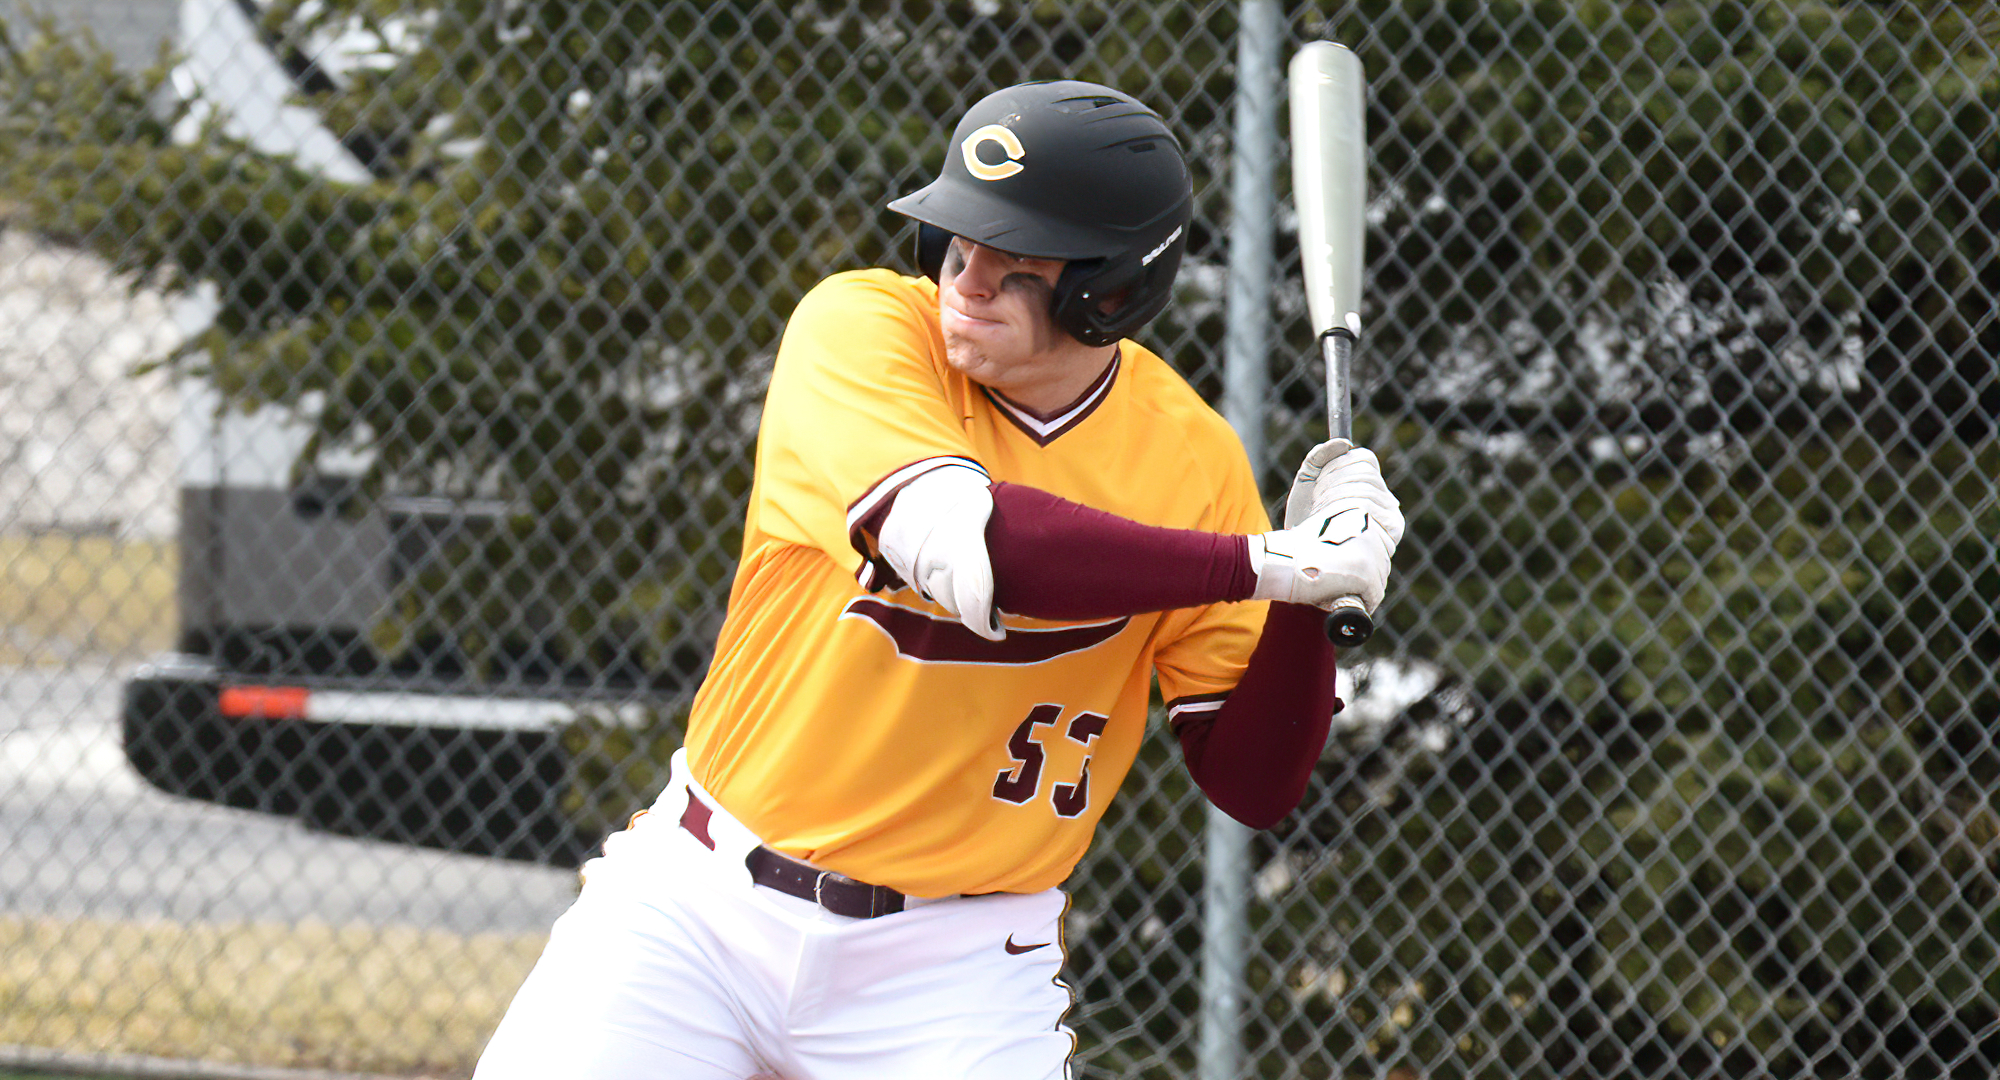 Isaac Henkemeyer-Howe went 4-for-7 and hit a 3-run homer to help Concordia split at Macalester. He is second in the MIAC with a .456 average.